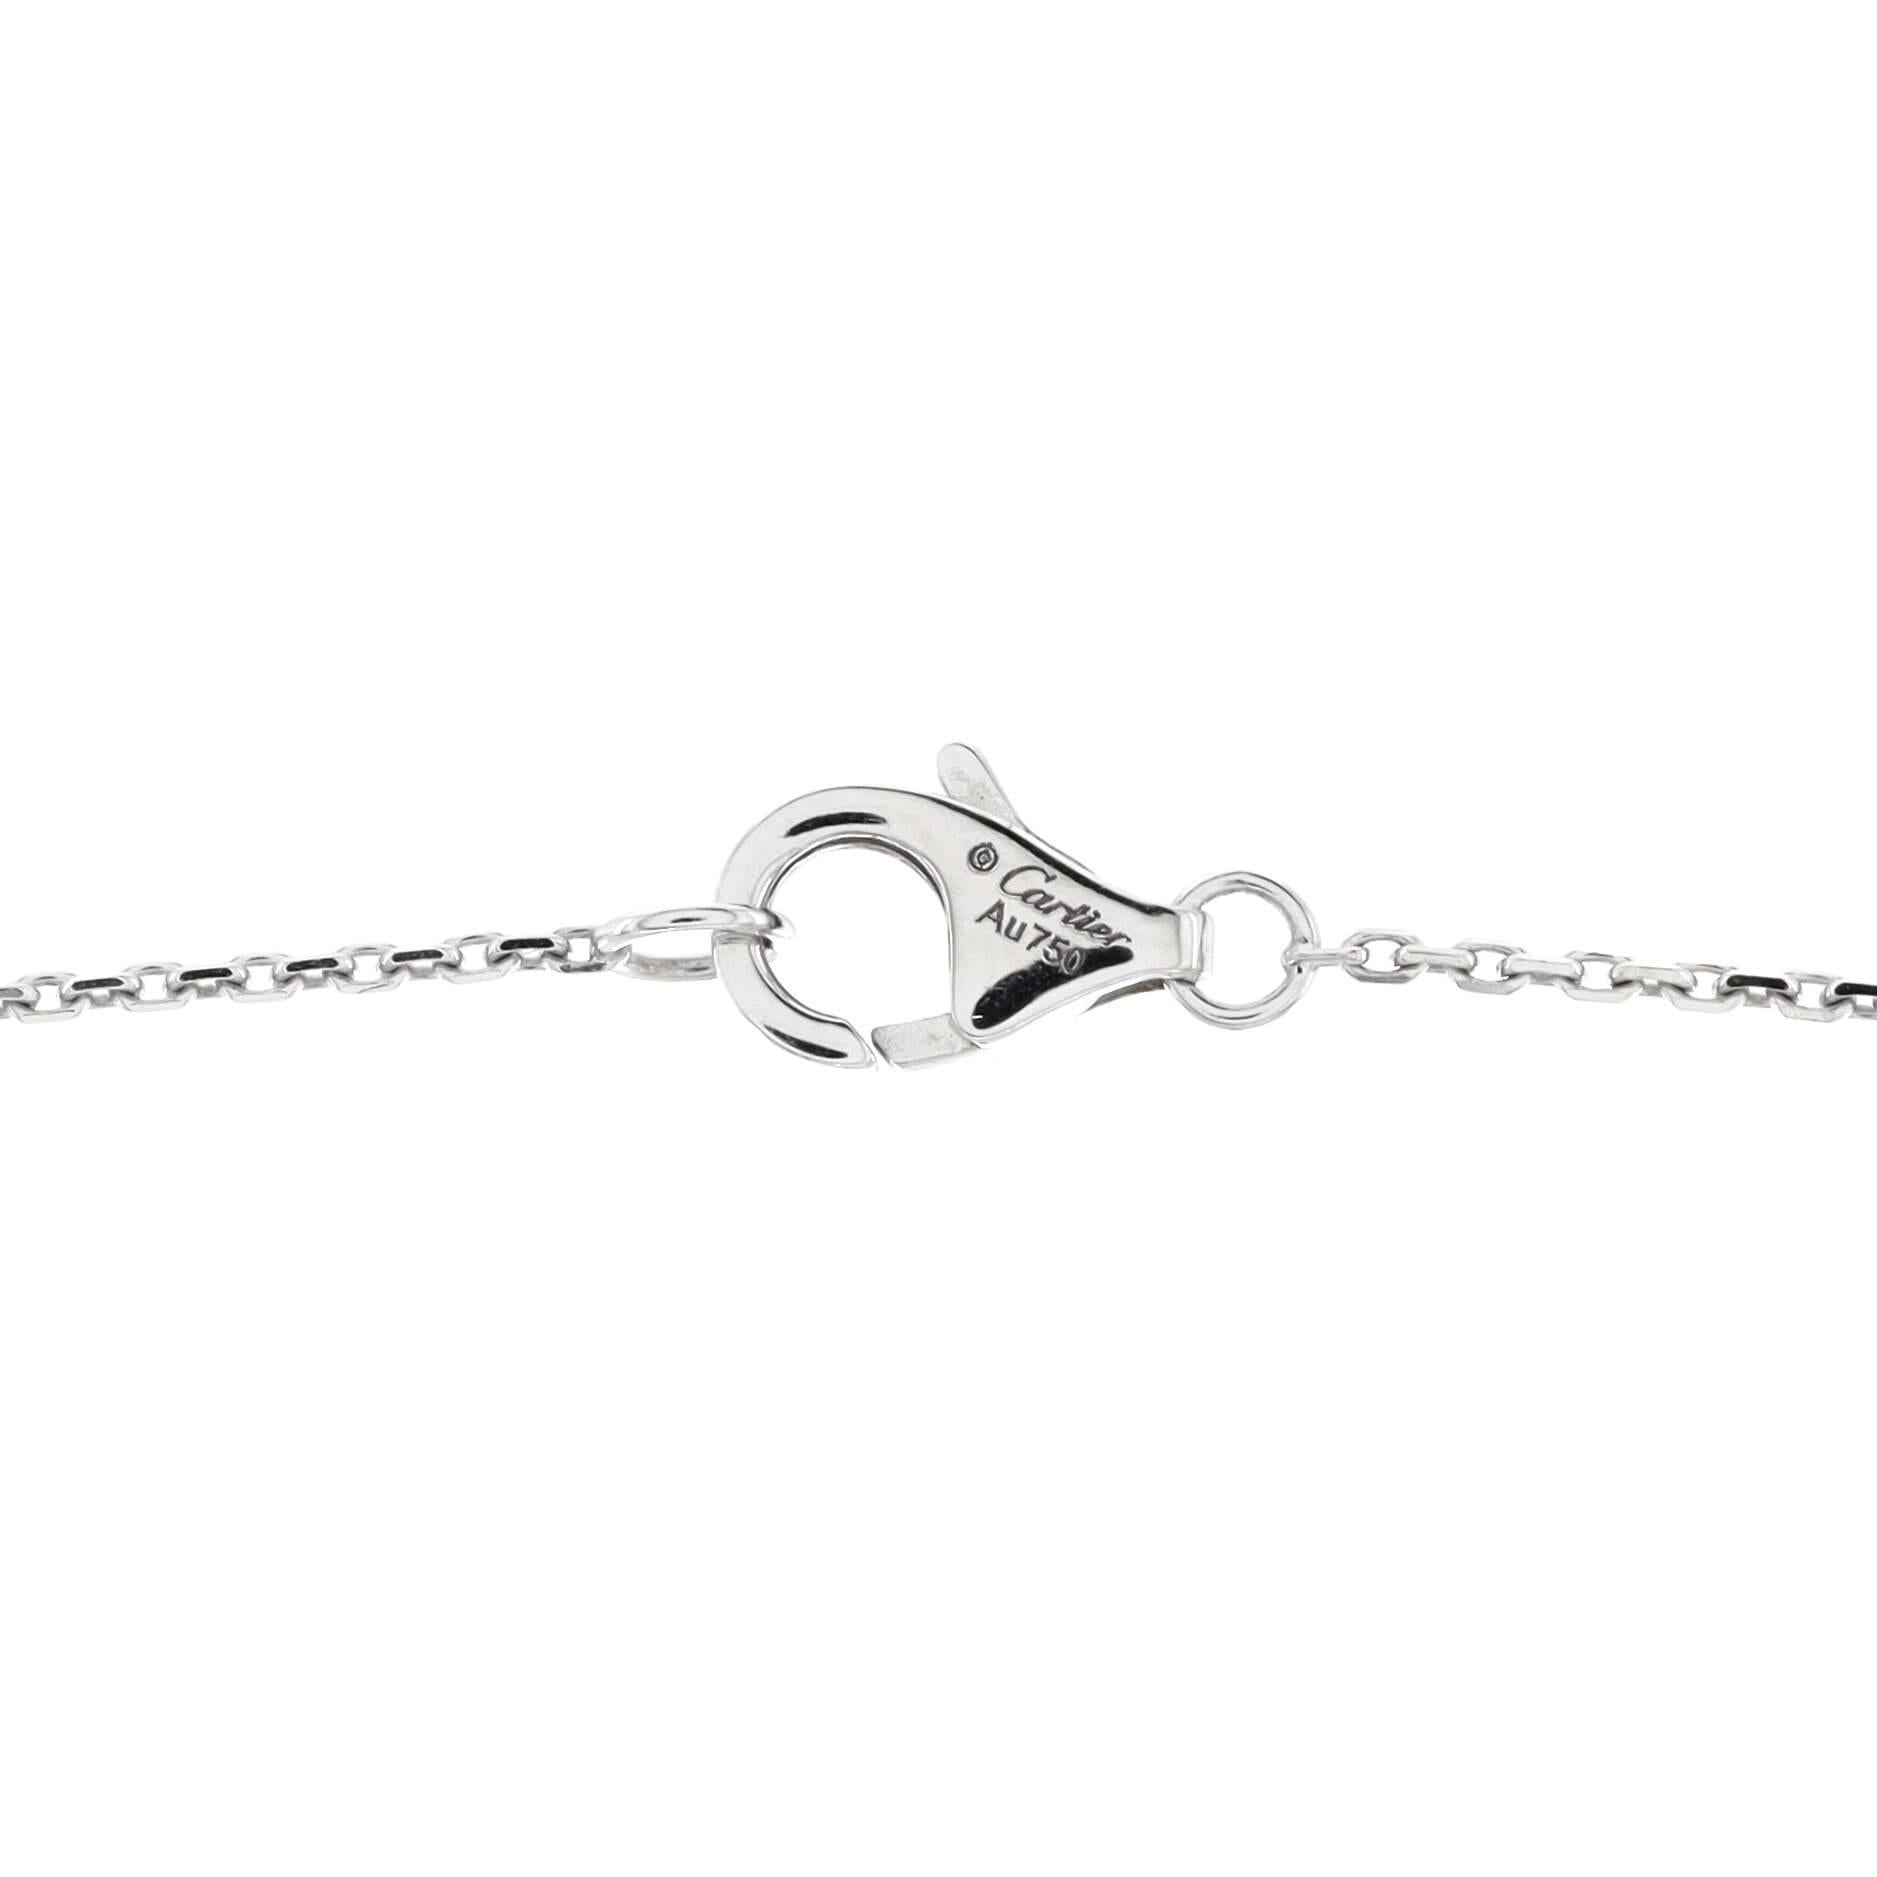 Women's or Men's Cartier Trinity Pendant Necklace 18K White Gold with Diamonds and Ceramic Small